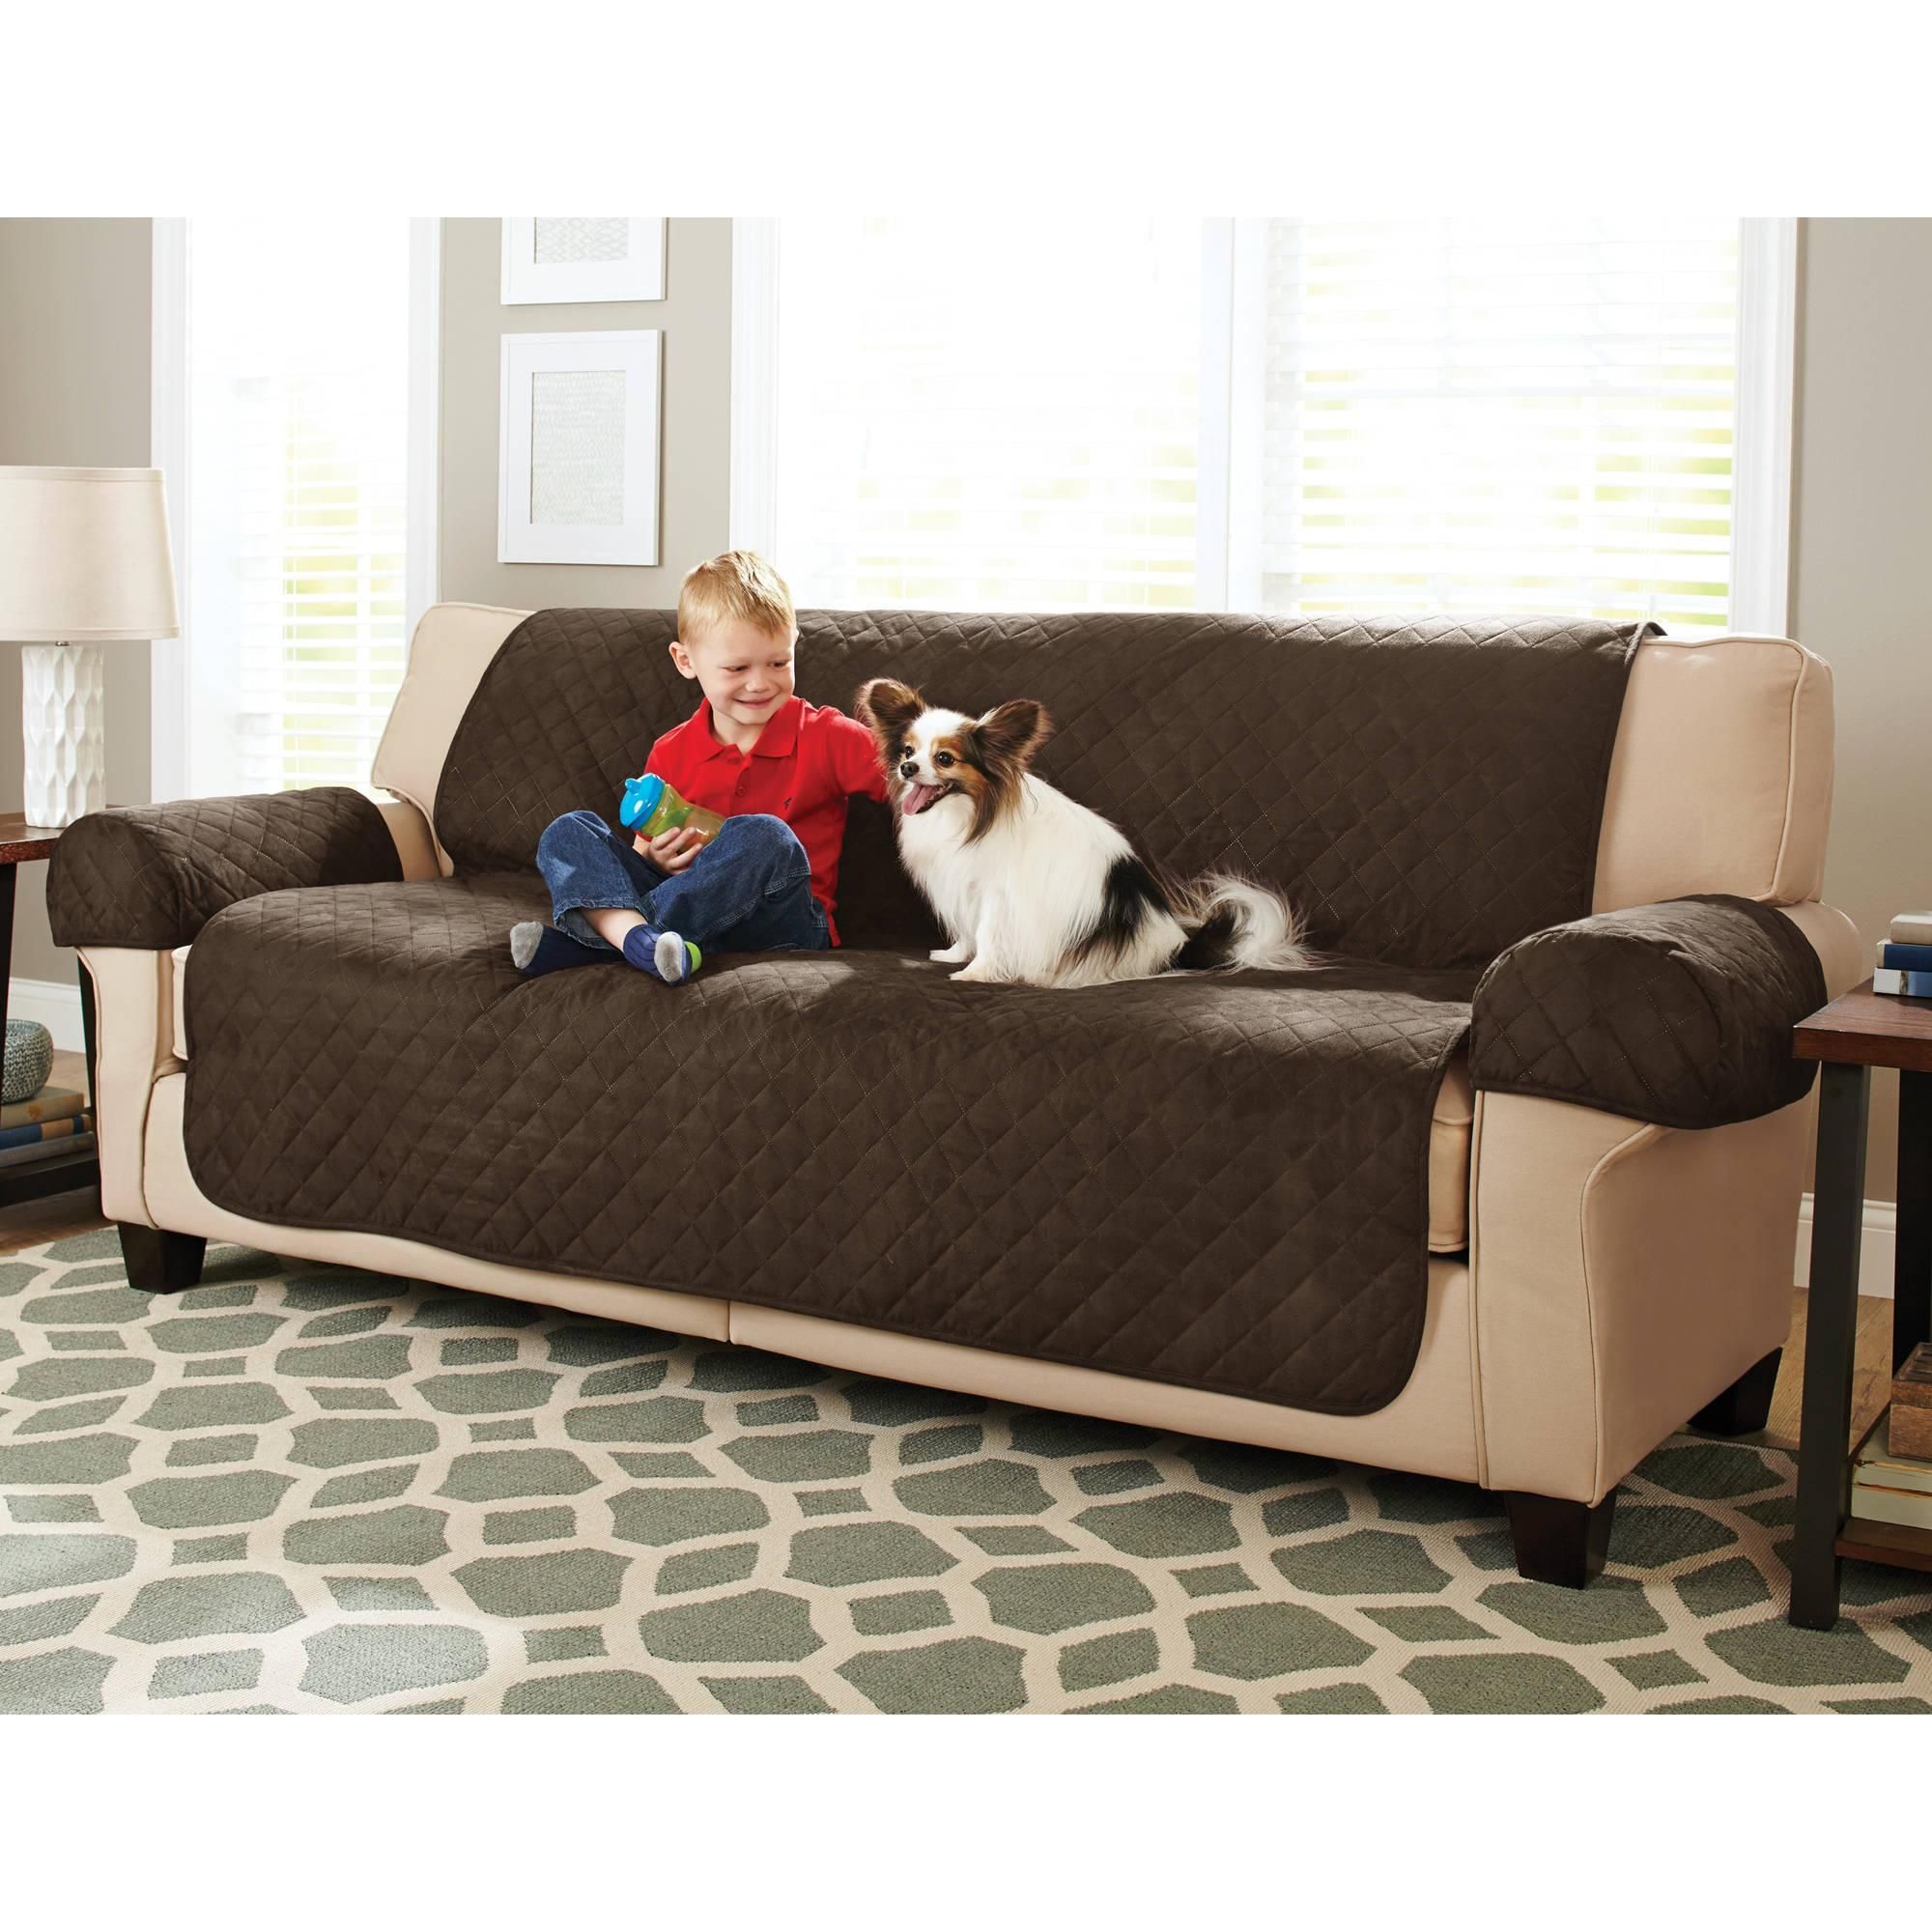 Better Homes And Gardens Waterproof Non Slip Faux Suede Pet Inside Slipcover For Leather Sofas (View 9 of 20)